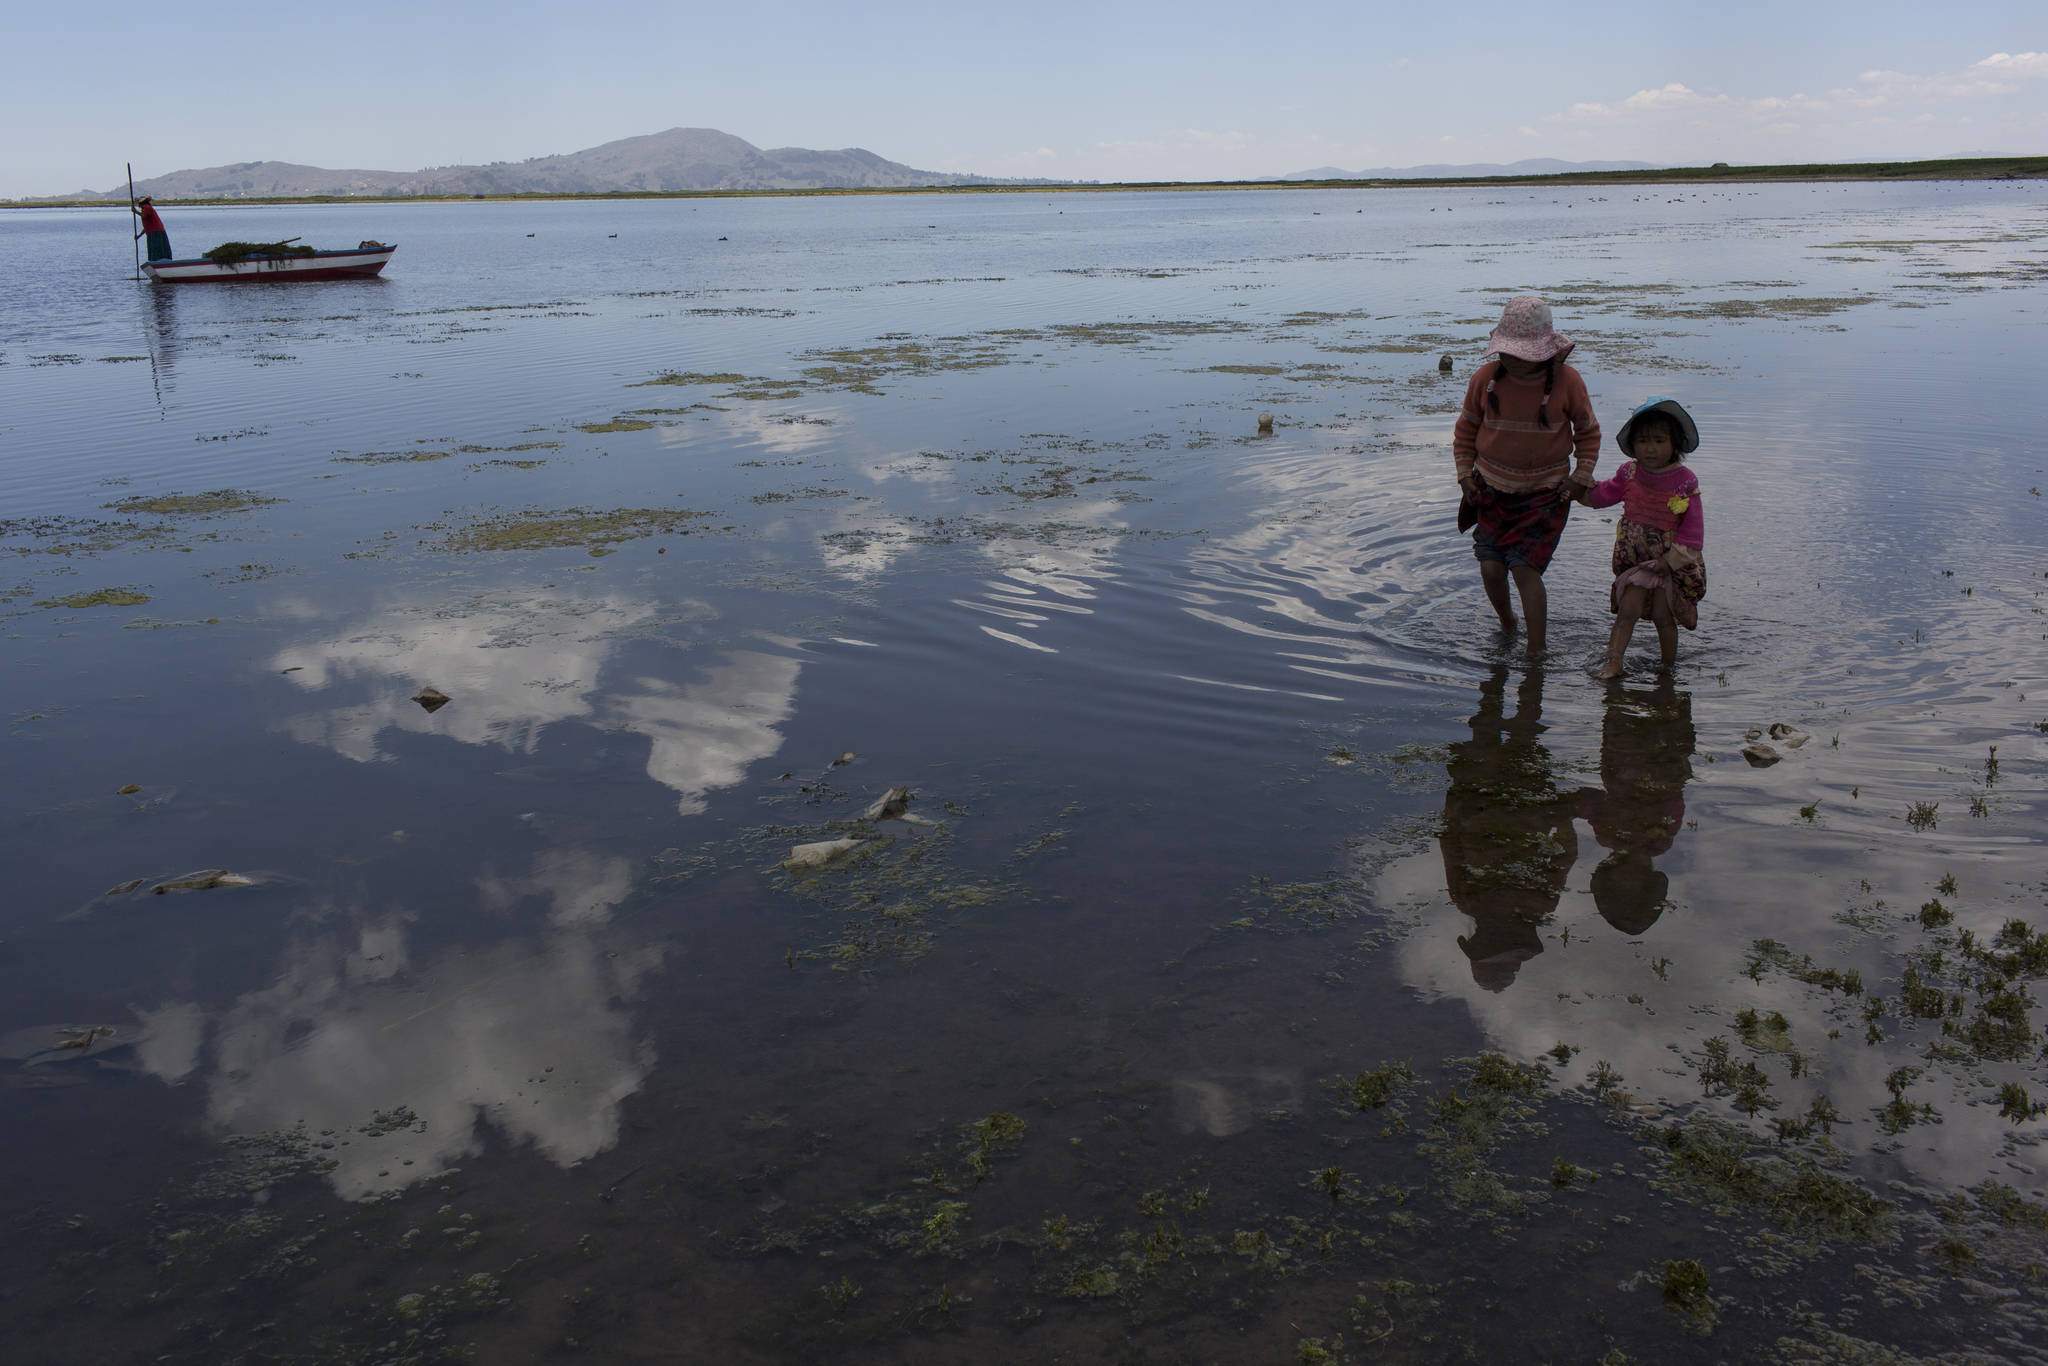 In this Feb. 2 photo, cousins from the Avila family search for discarded toys on the shores of Lake Titicaca, in Coata in the Puno region of Peru.The shores of South America’s largest lake are littered with dead frogs, discarded paint buckets and bags of soggy trash. Less visible threats lurk in the water itself: highly toxic levels of lead and mercury. (Rodrigo Abd | The Associated Press)